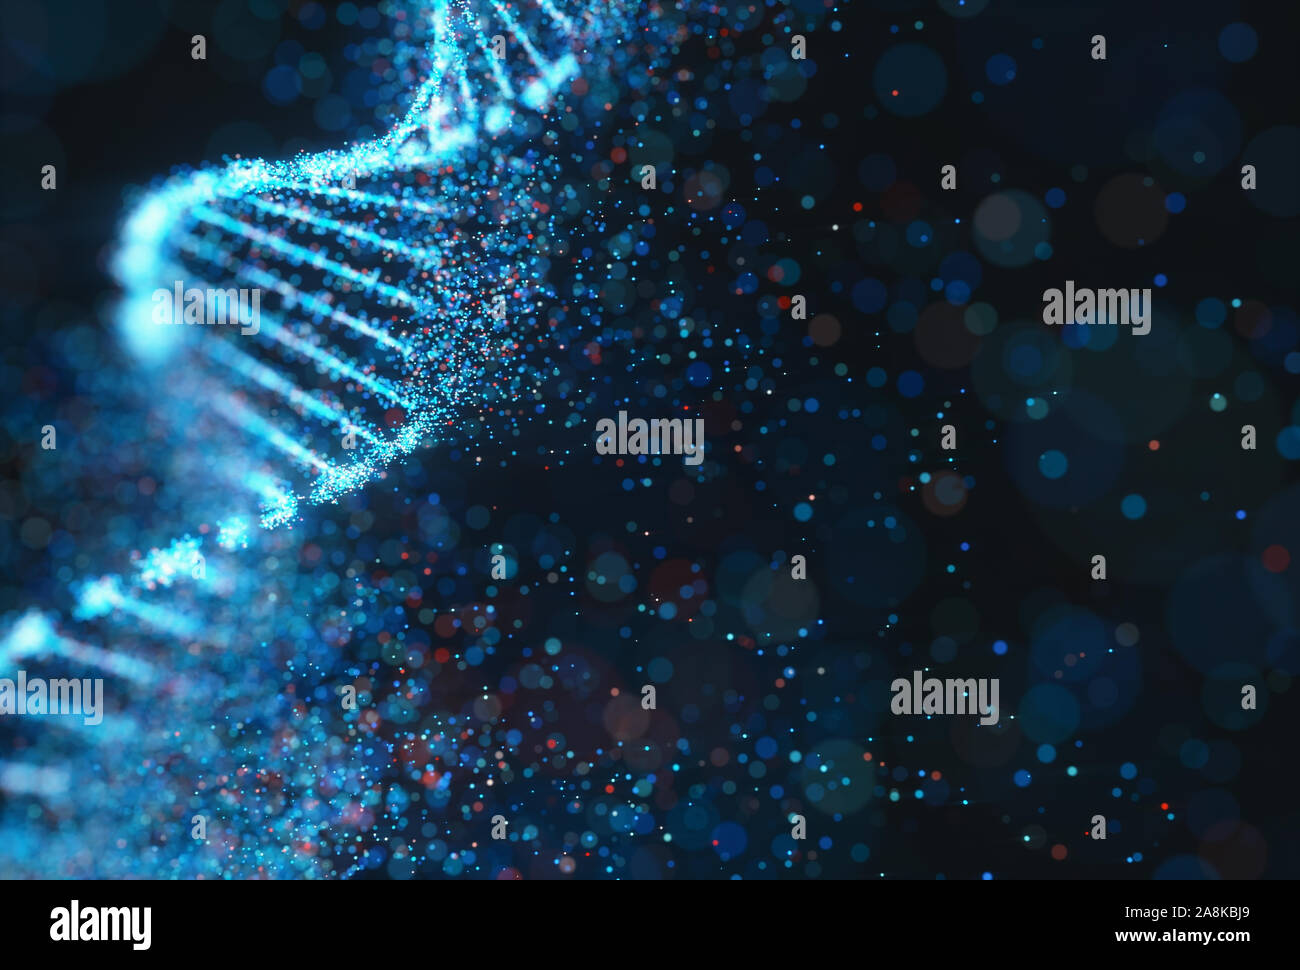 Colorful DNA molecule. Concept image of a structure of the genetic code. 3D illustration of genetic code and science. Stock Photo